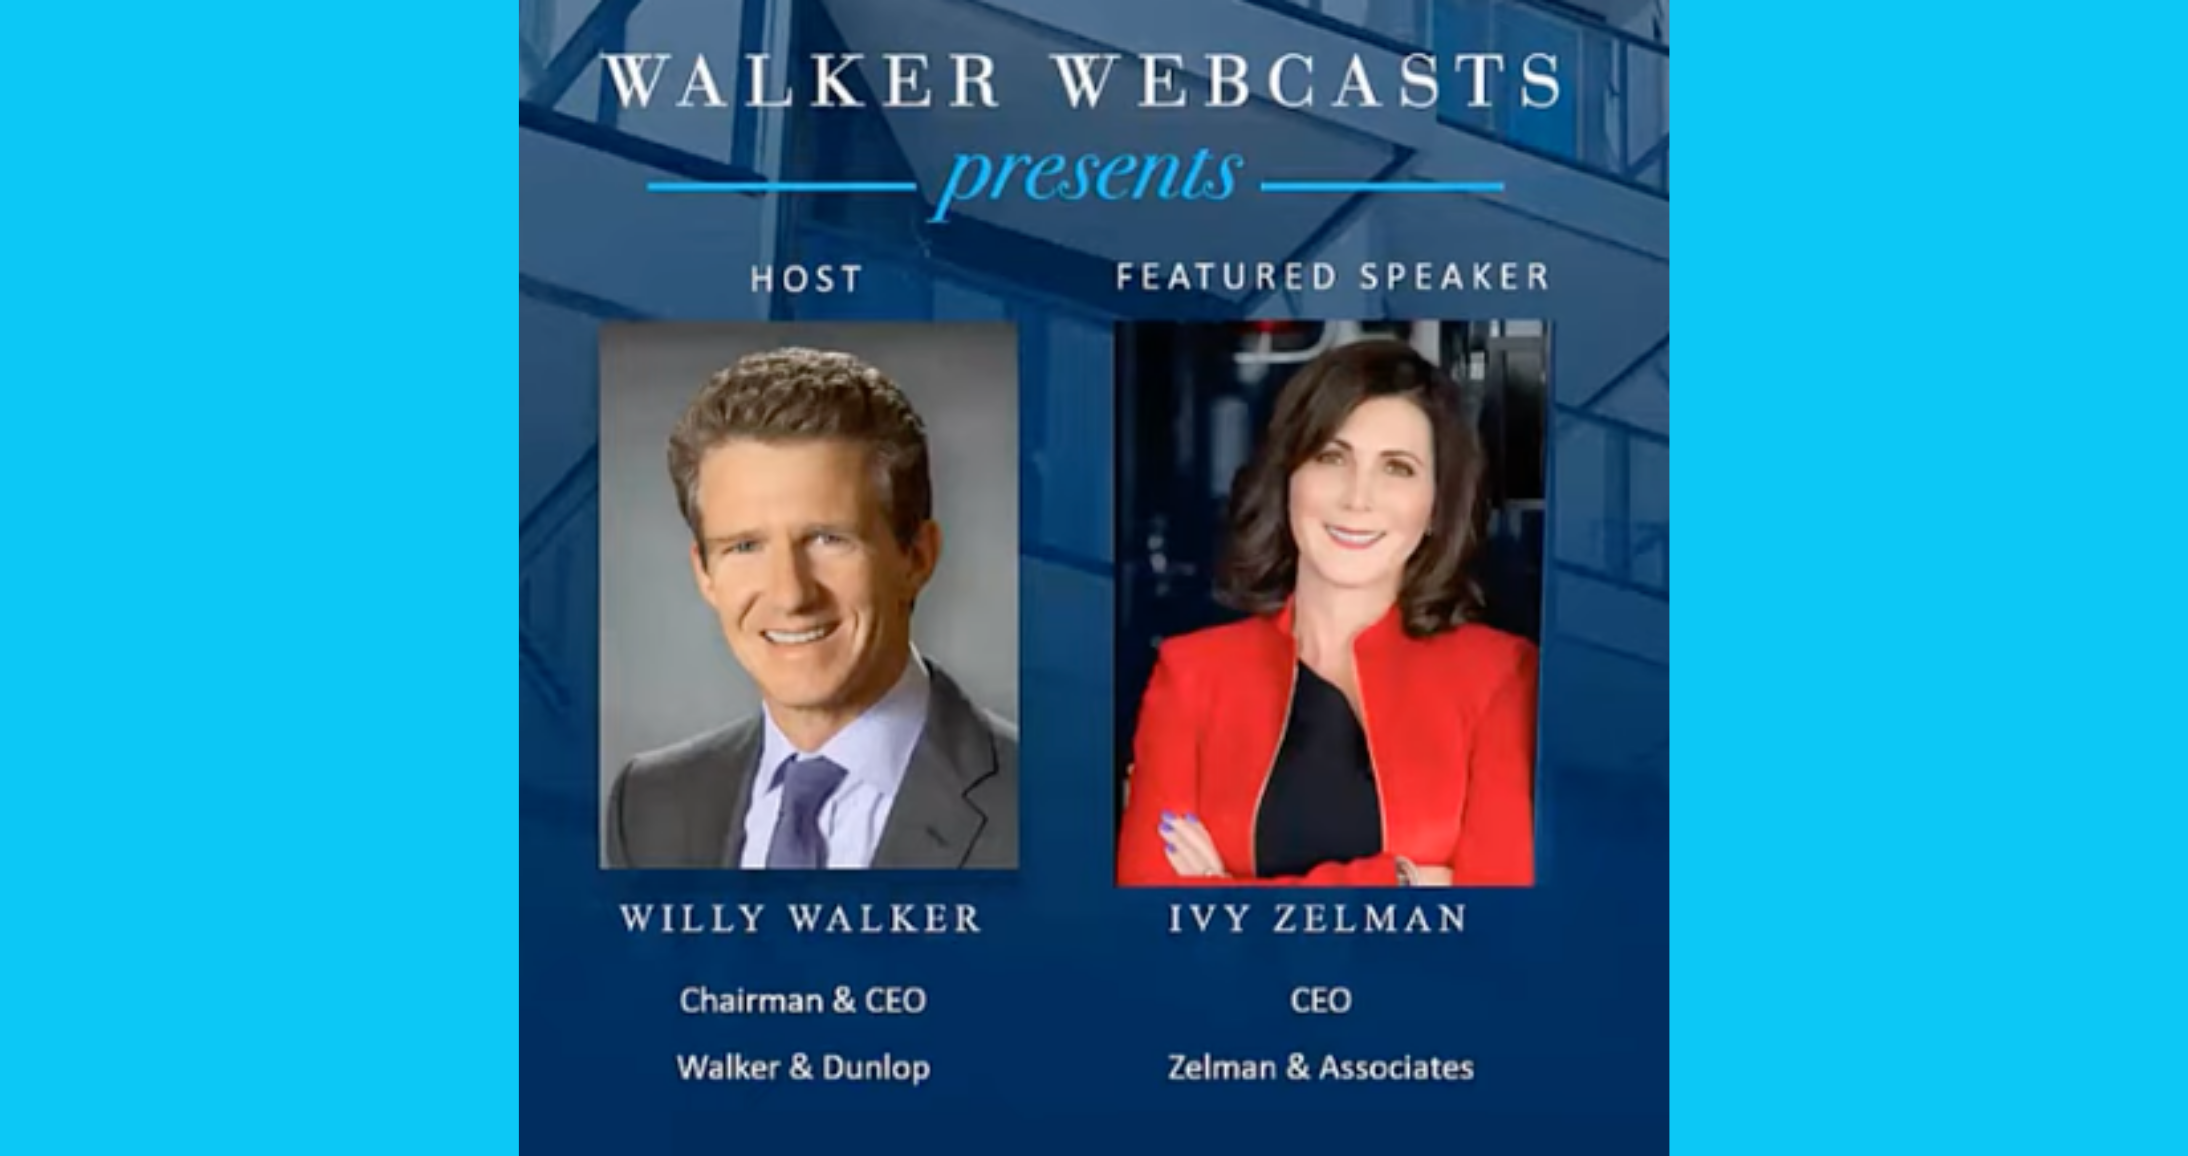 Walker Webcast: Where Are the Single-Family and Multi-Family Markets Headed?